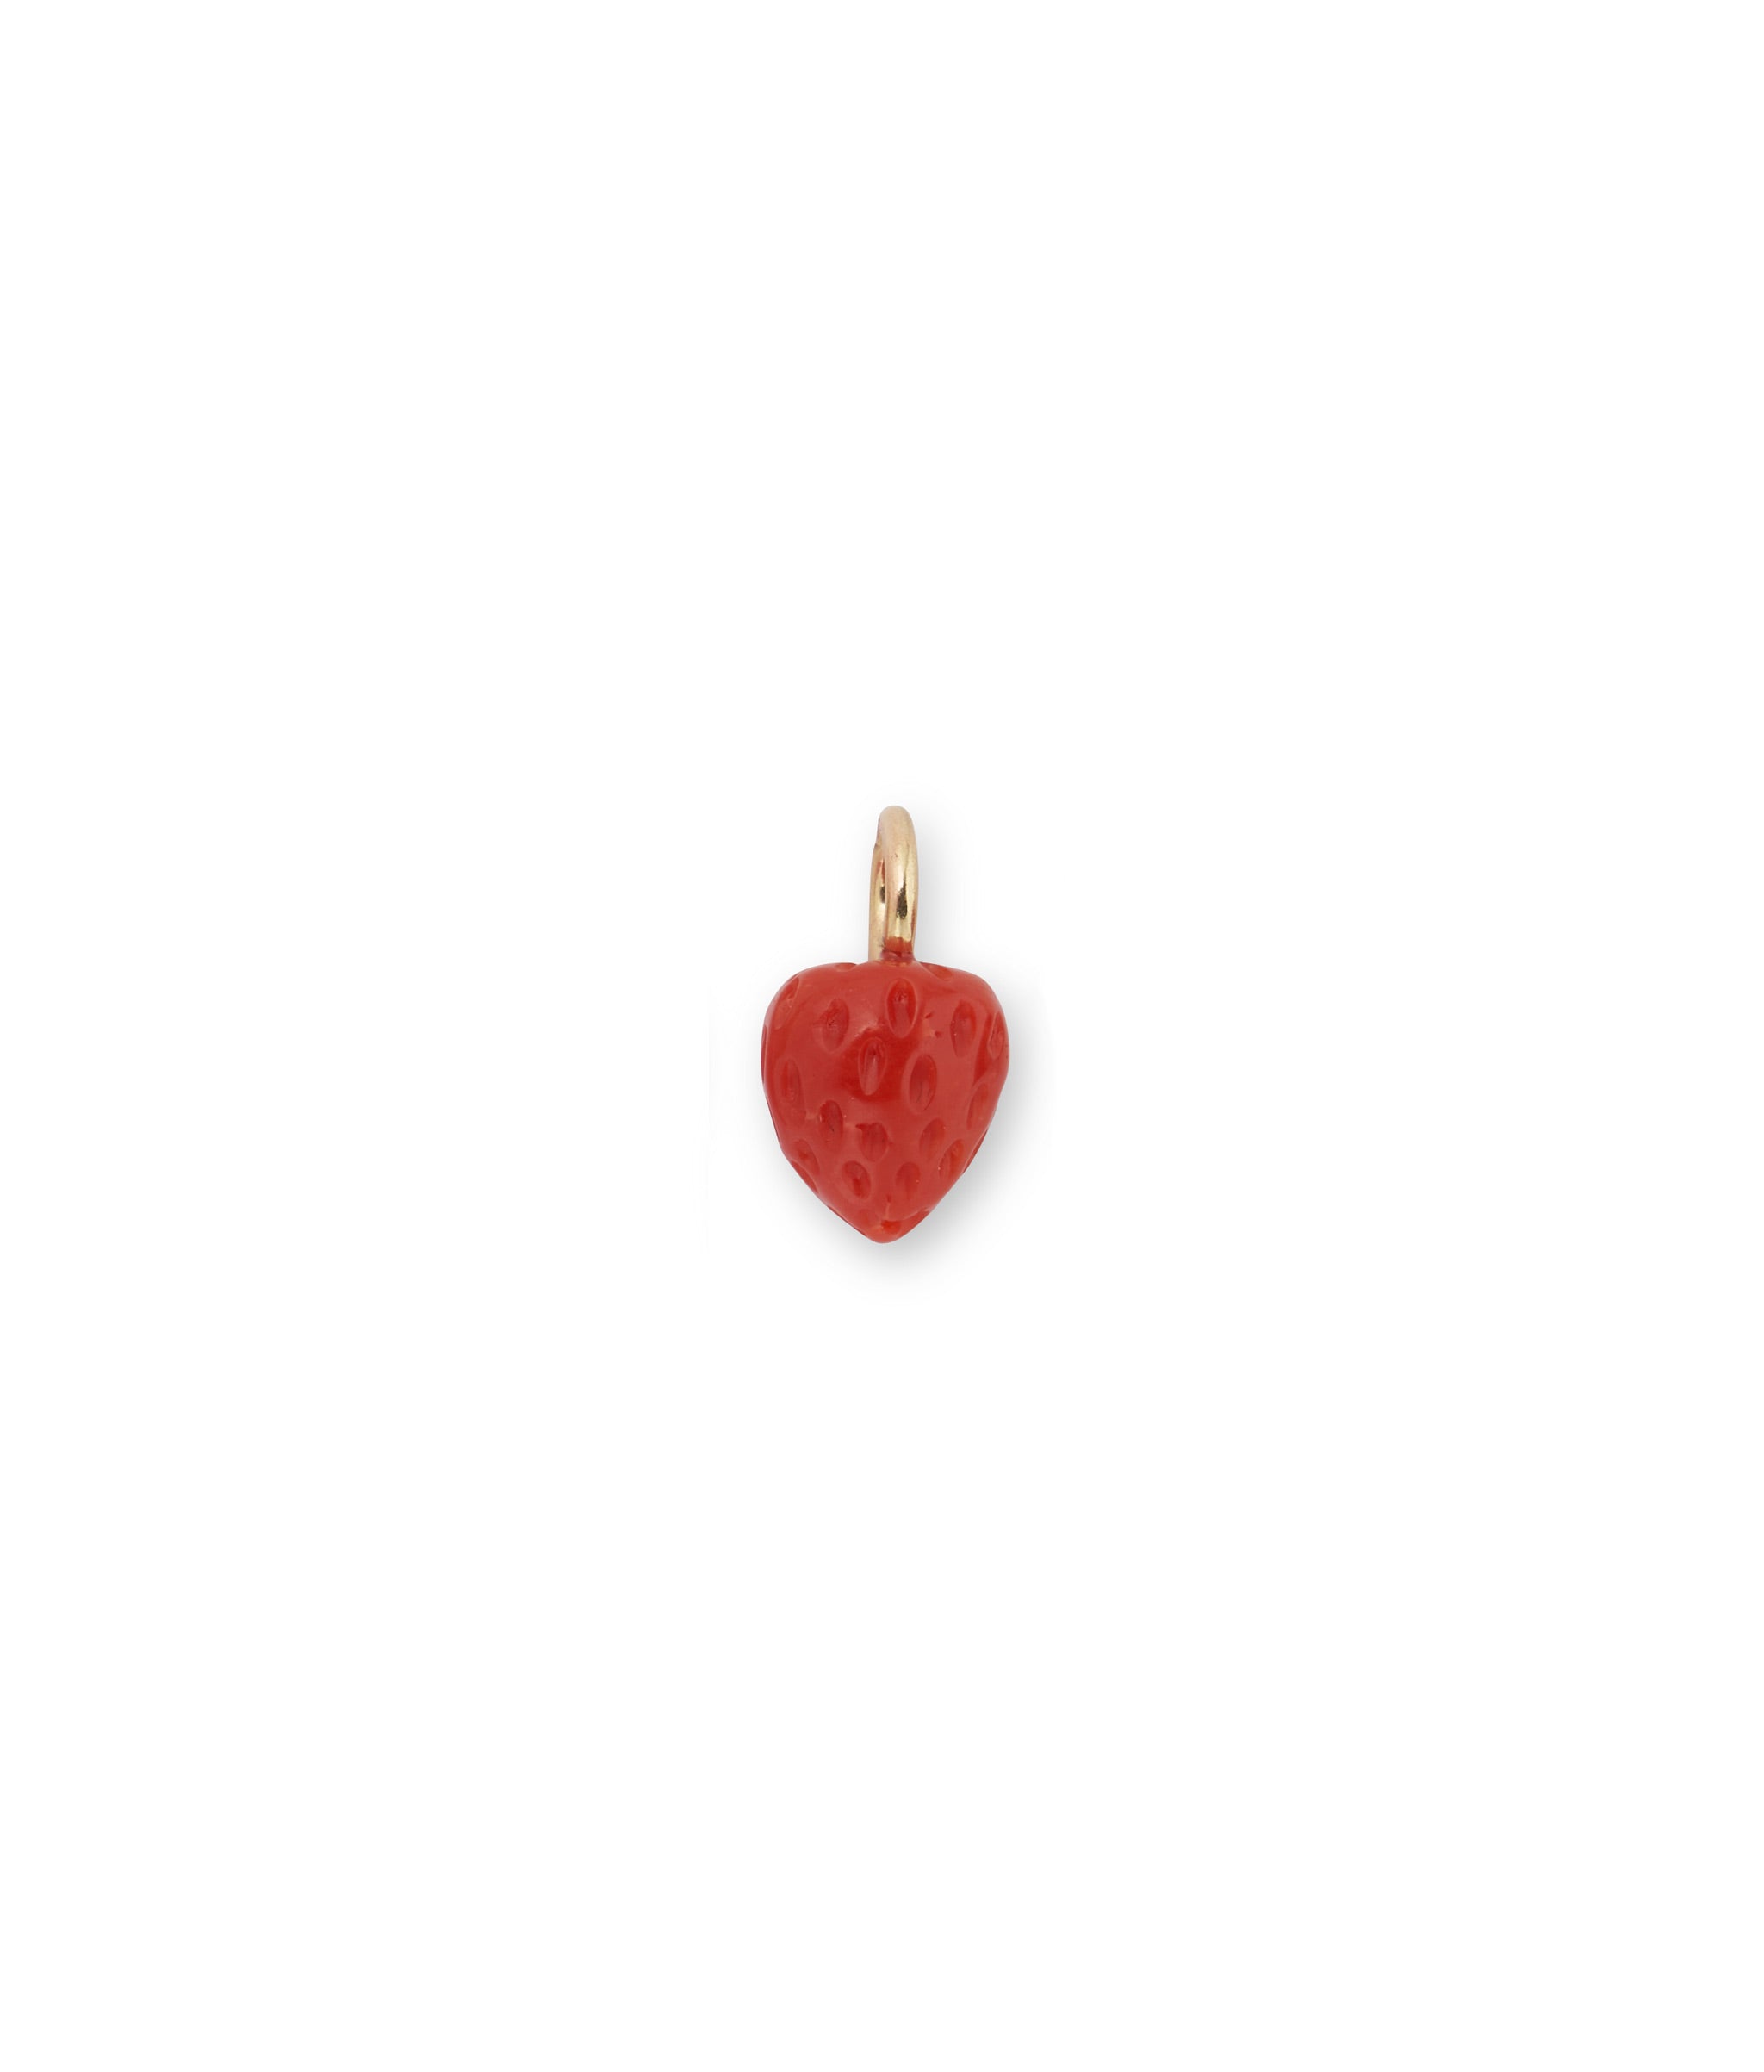 Hand carved coral and 14k gold puffy strawberry necklace charm.